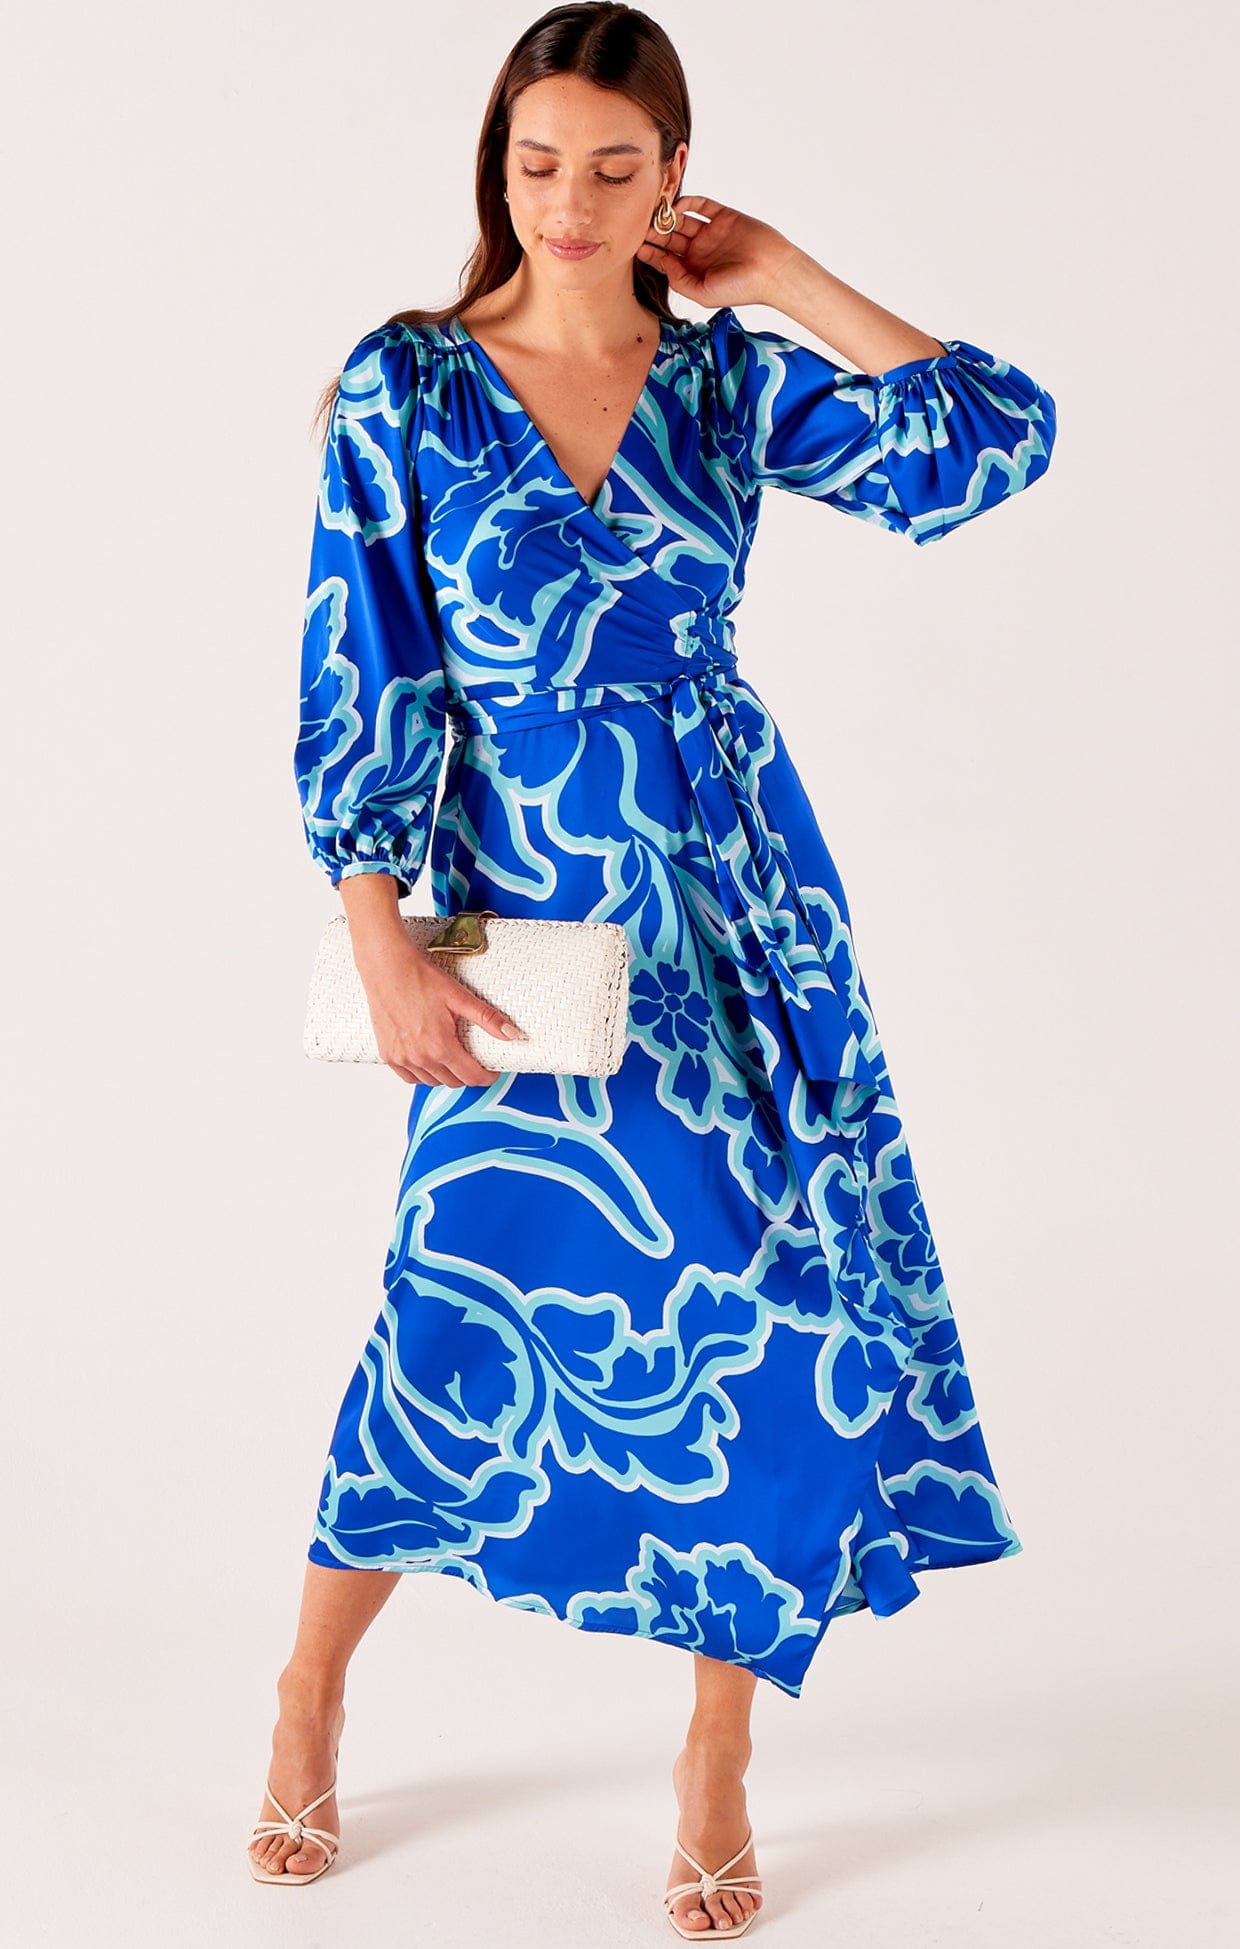 Dresses Events ETHEREAL WRAP DRESS IN AZURE BLUE FLORAL